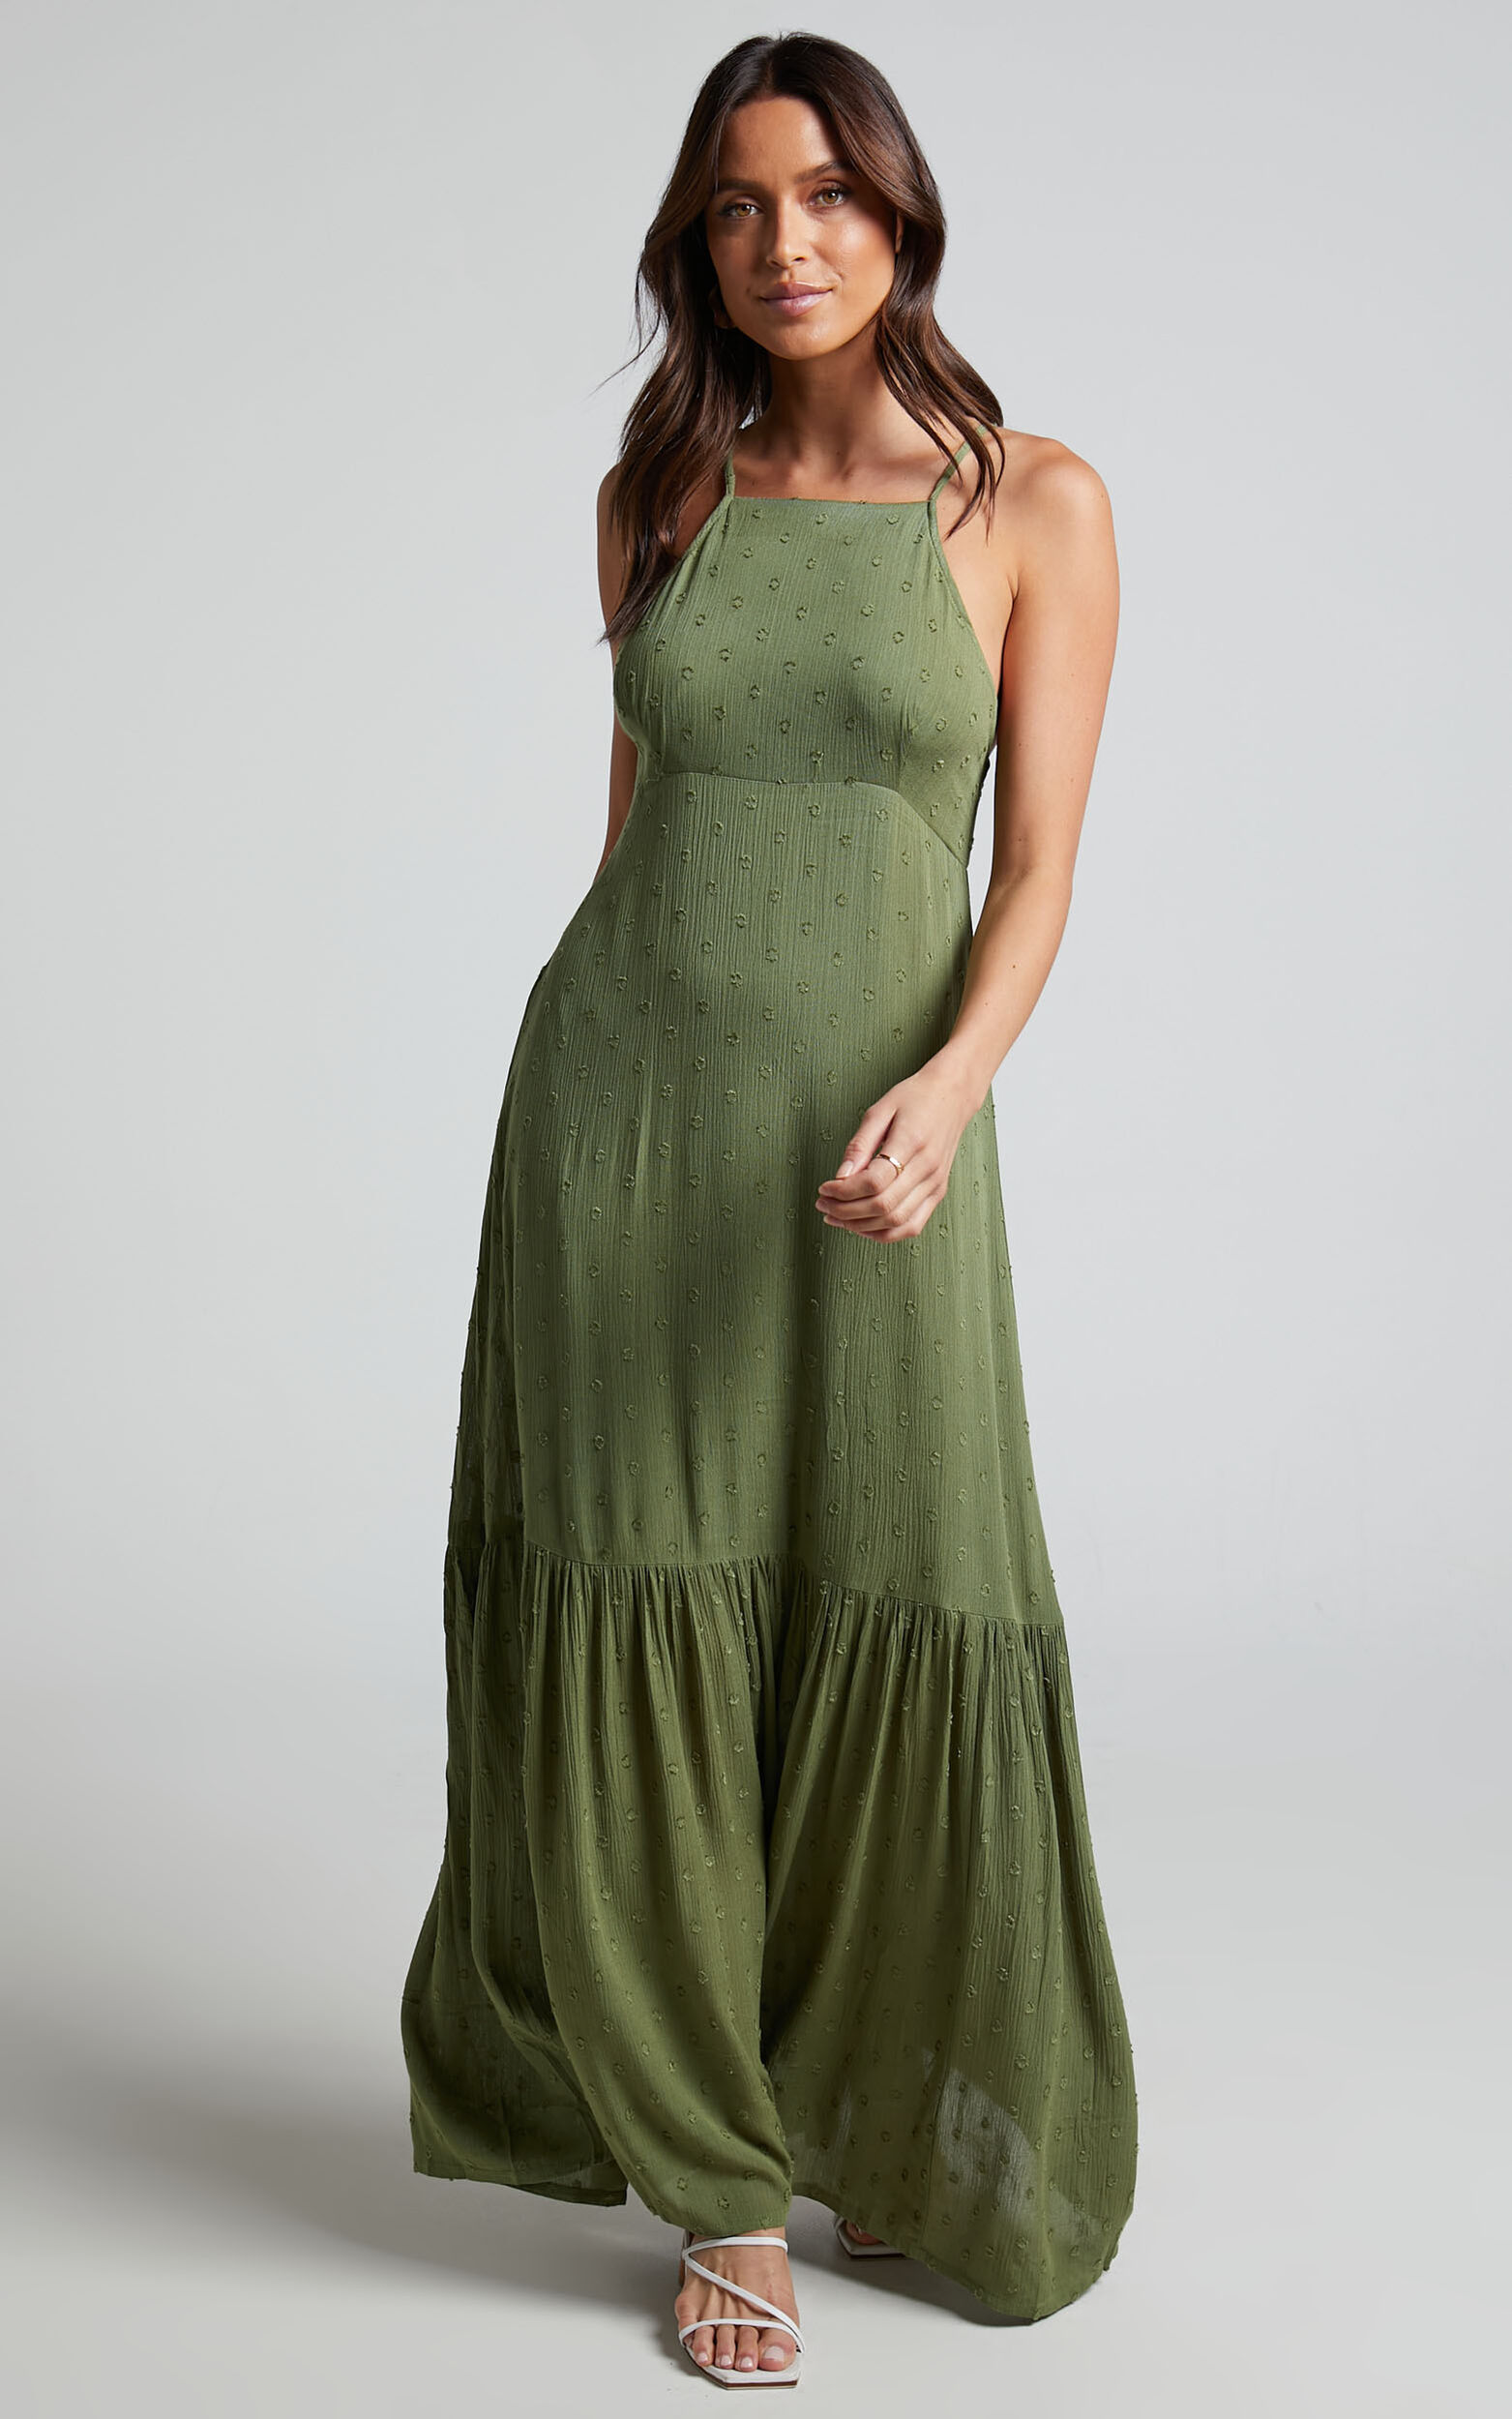 Cariele Midaxi Dress - Strappy Tiered Dotted Dress in Olive - 06, GRN1